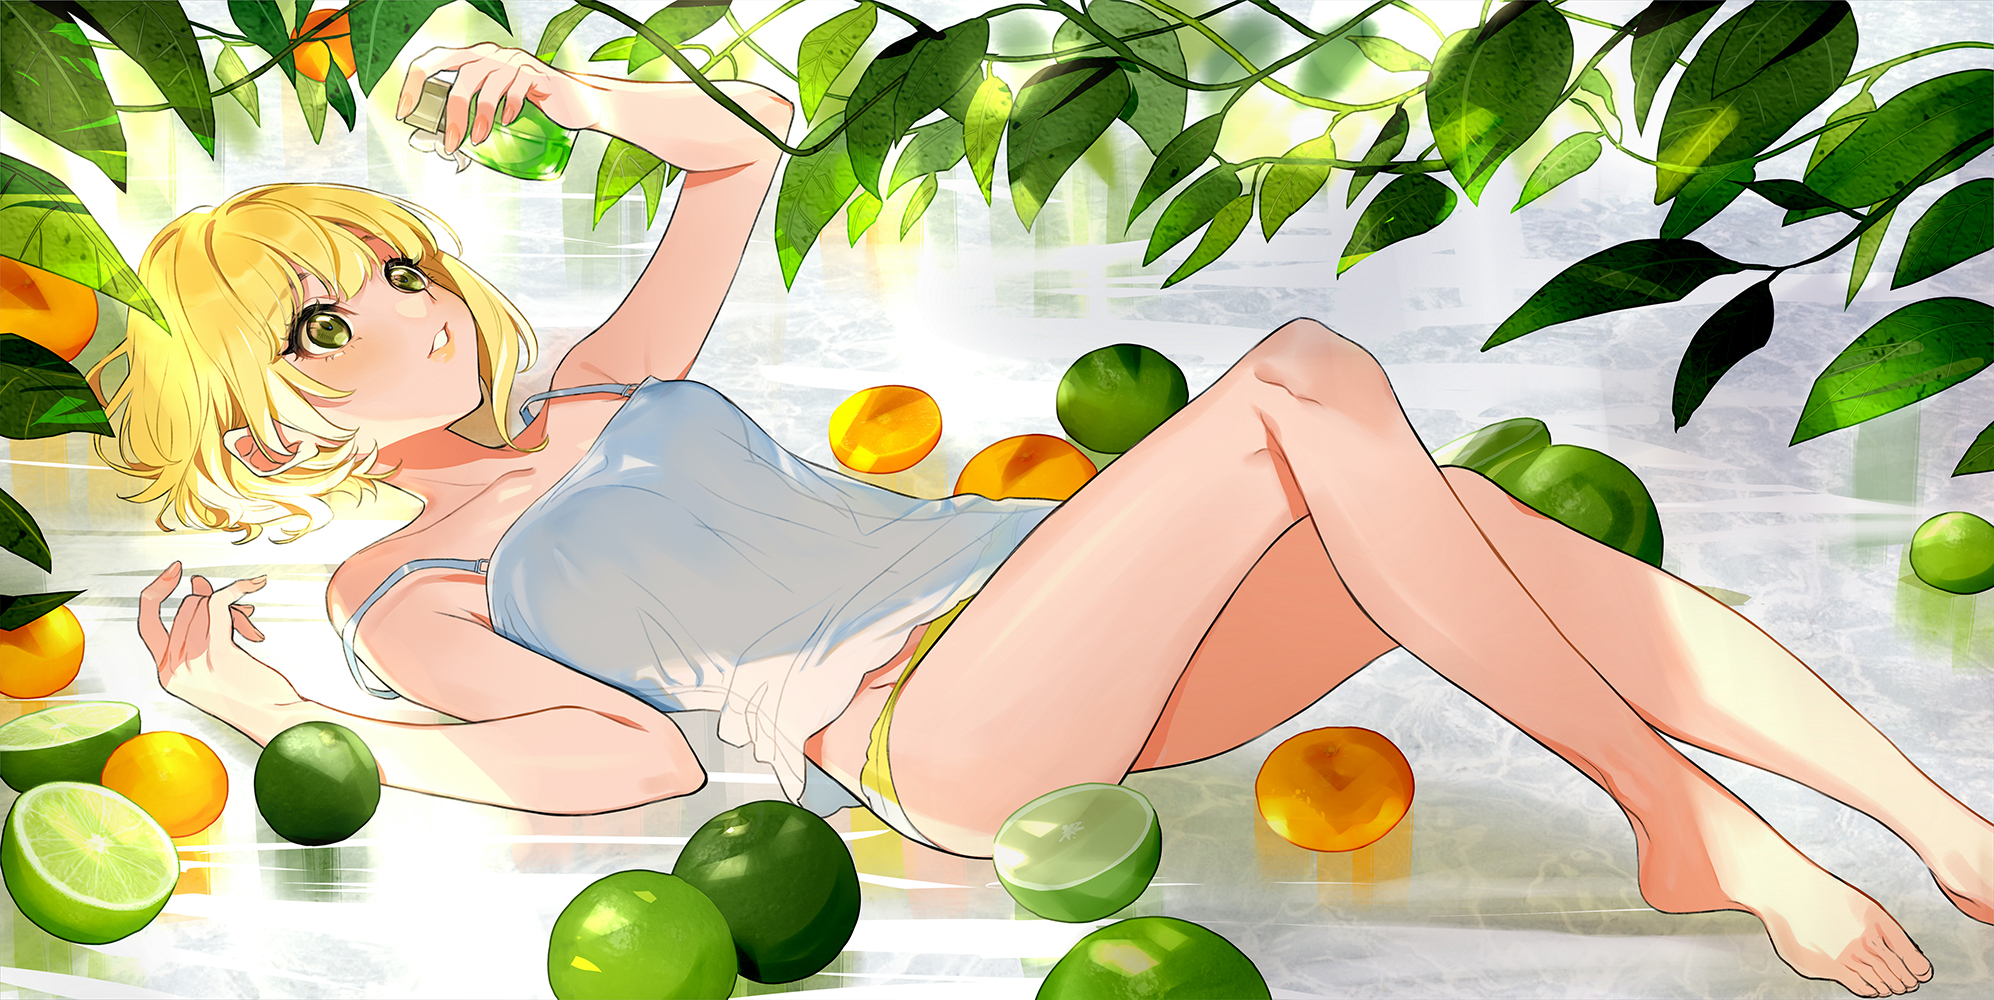 Yellow Hair Yellow Eyes Apples Leaves Laying On Back White Tank Top Anime 1994x1000